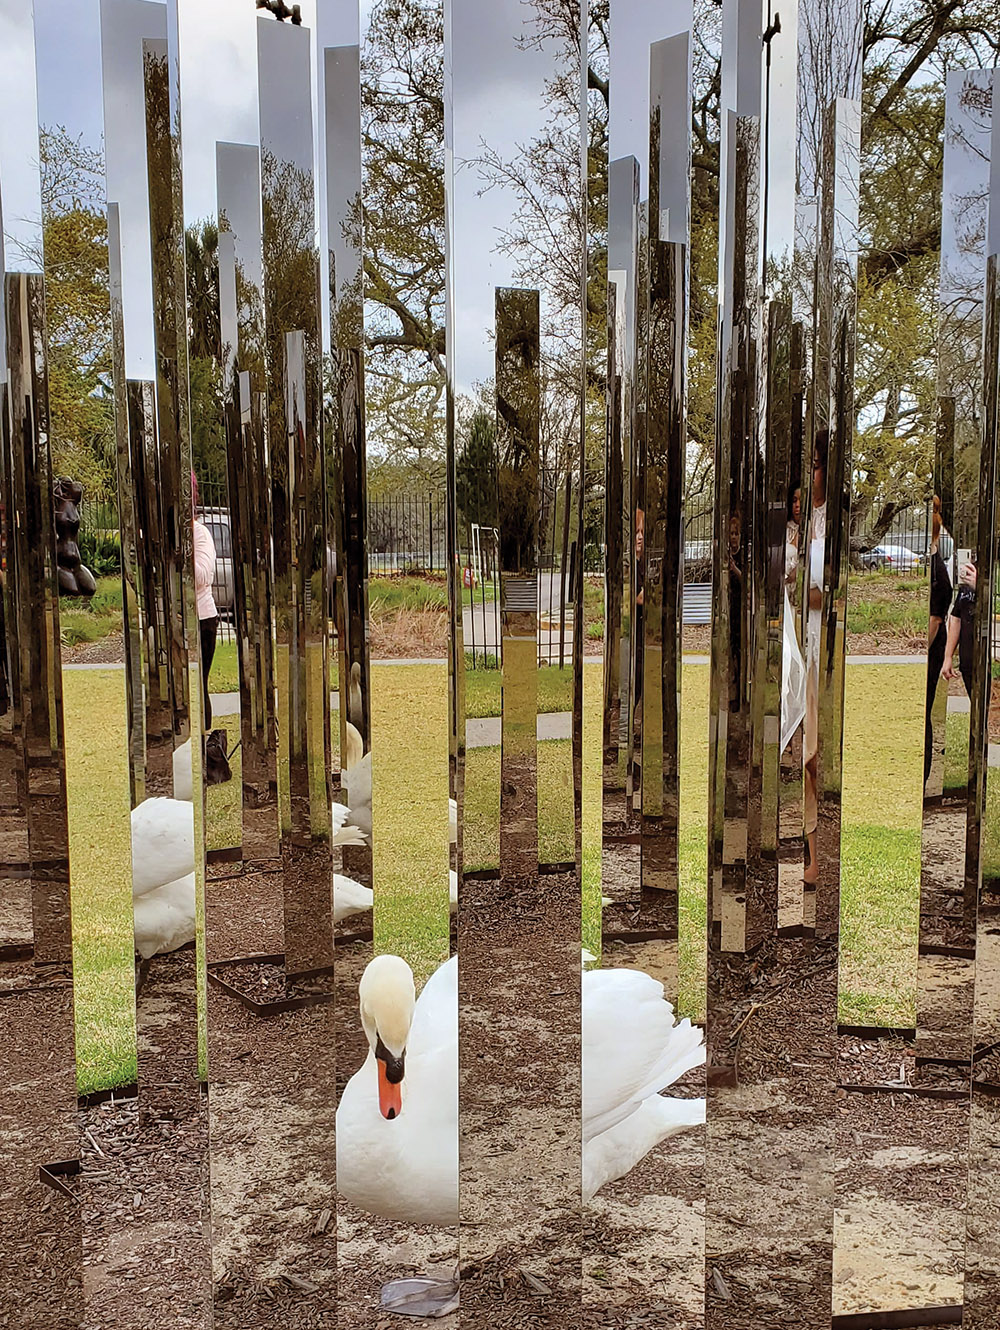 Swan in Mirror Labyrinth by Jeppe Hein